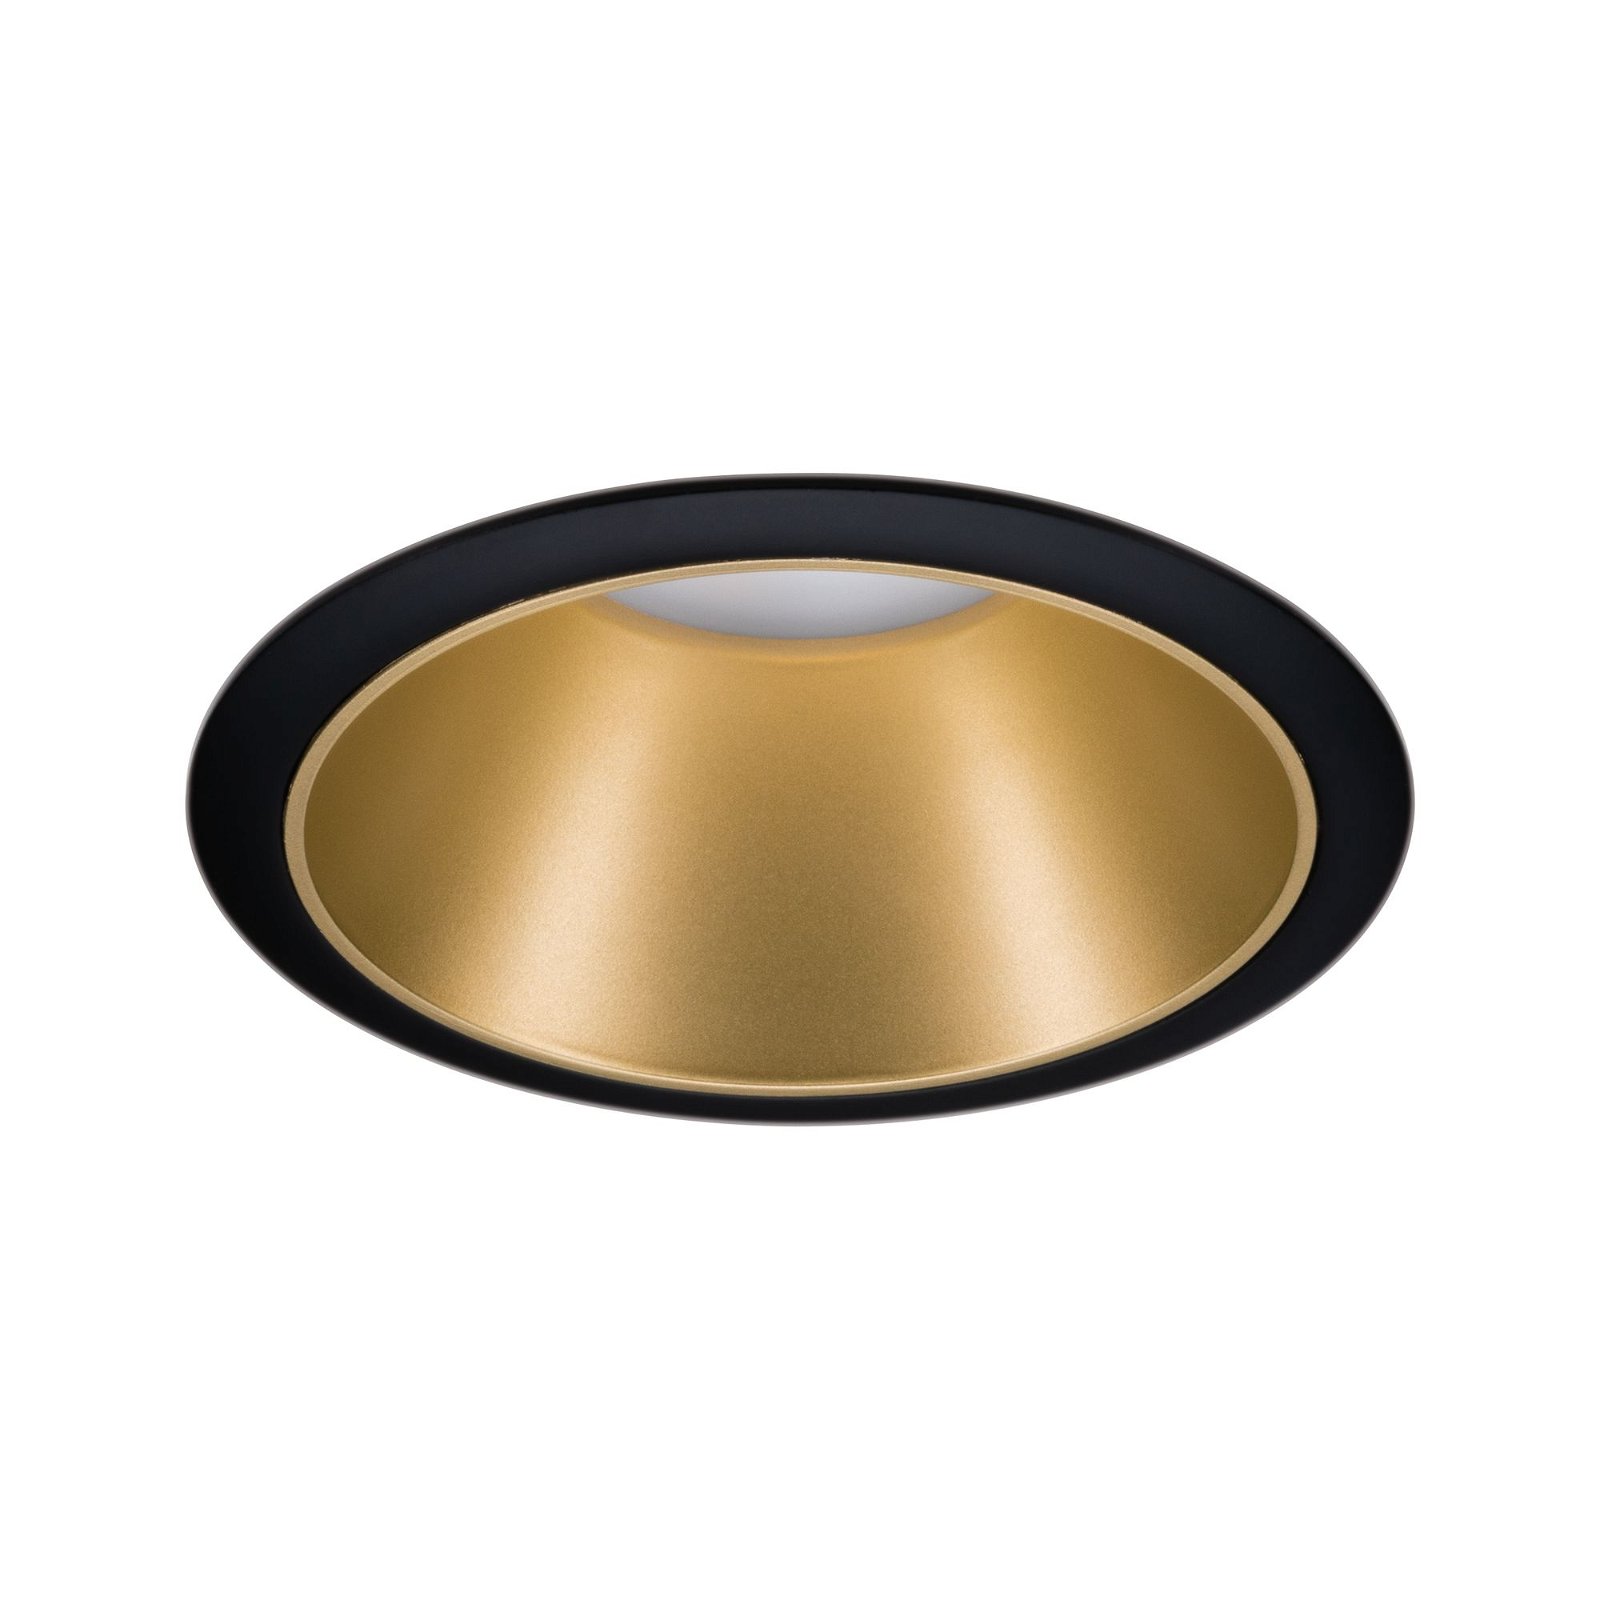 LED Recessed luminaire 3-Step-Dim Cole Coin IP44 round 88mm Coin 6,5W 460lm 230V dimmable 2700K Black/Gold matt